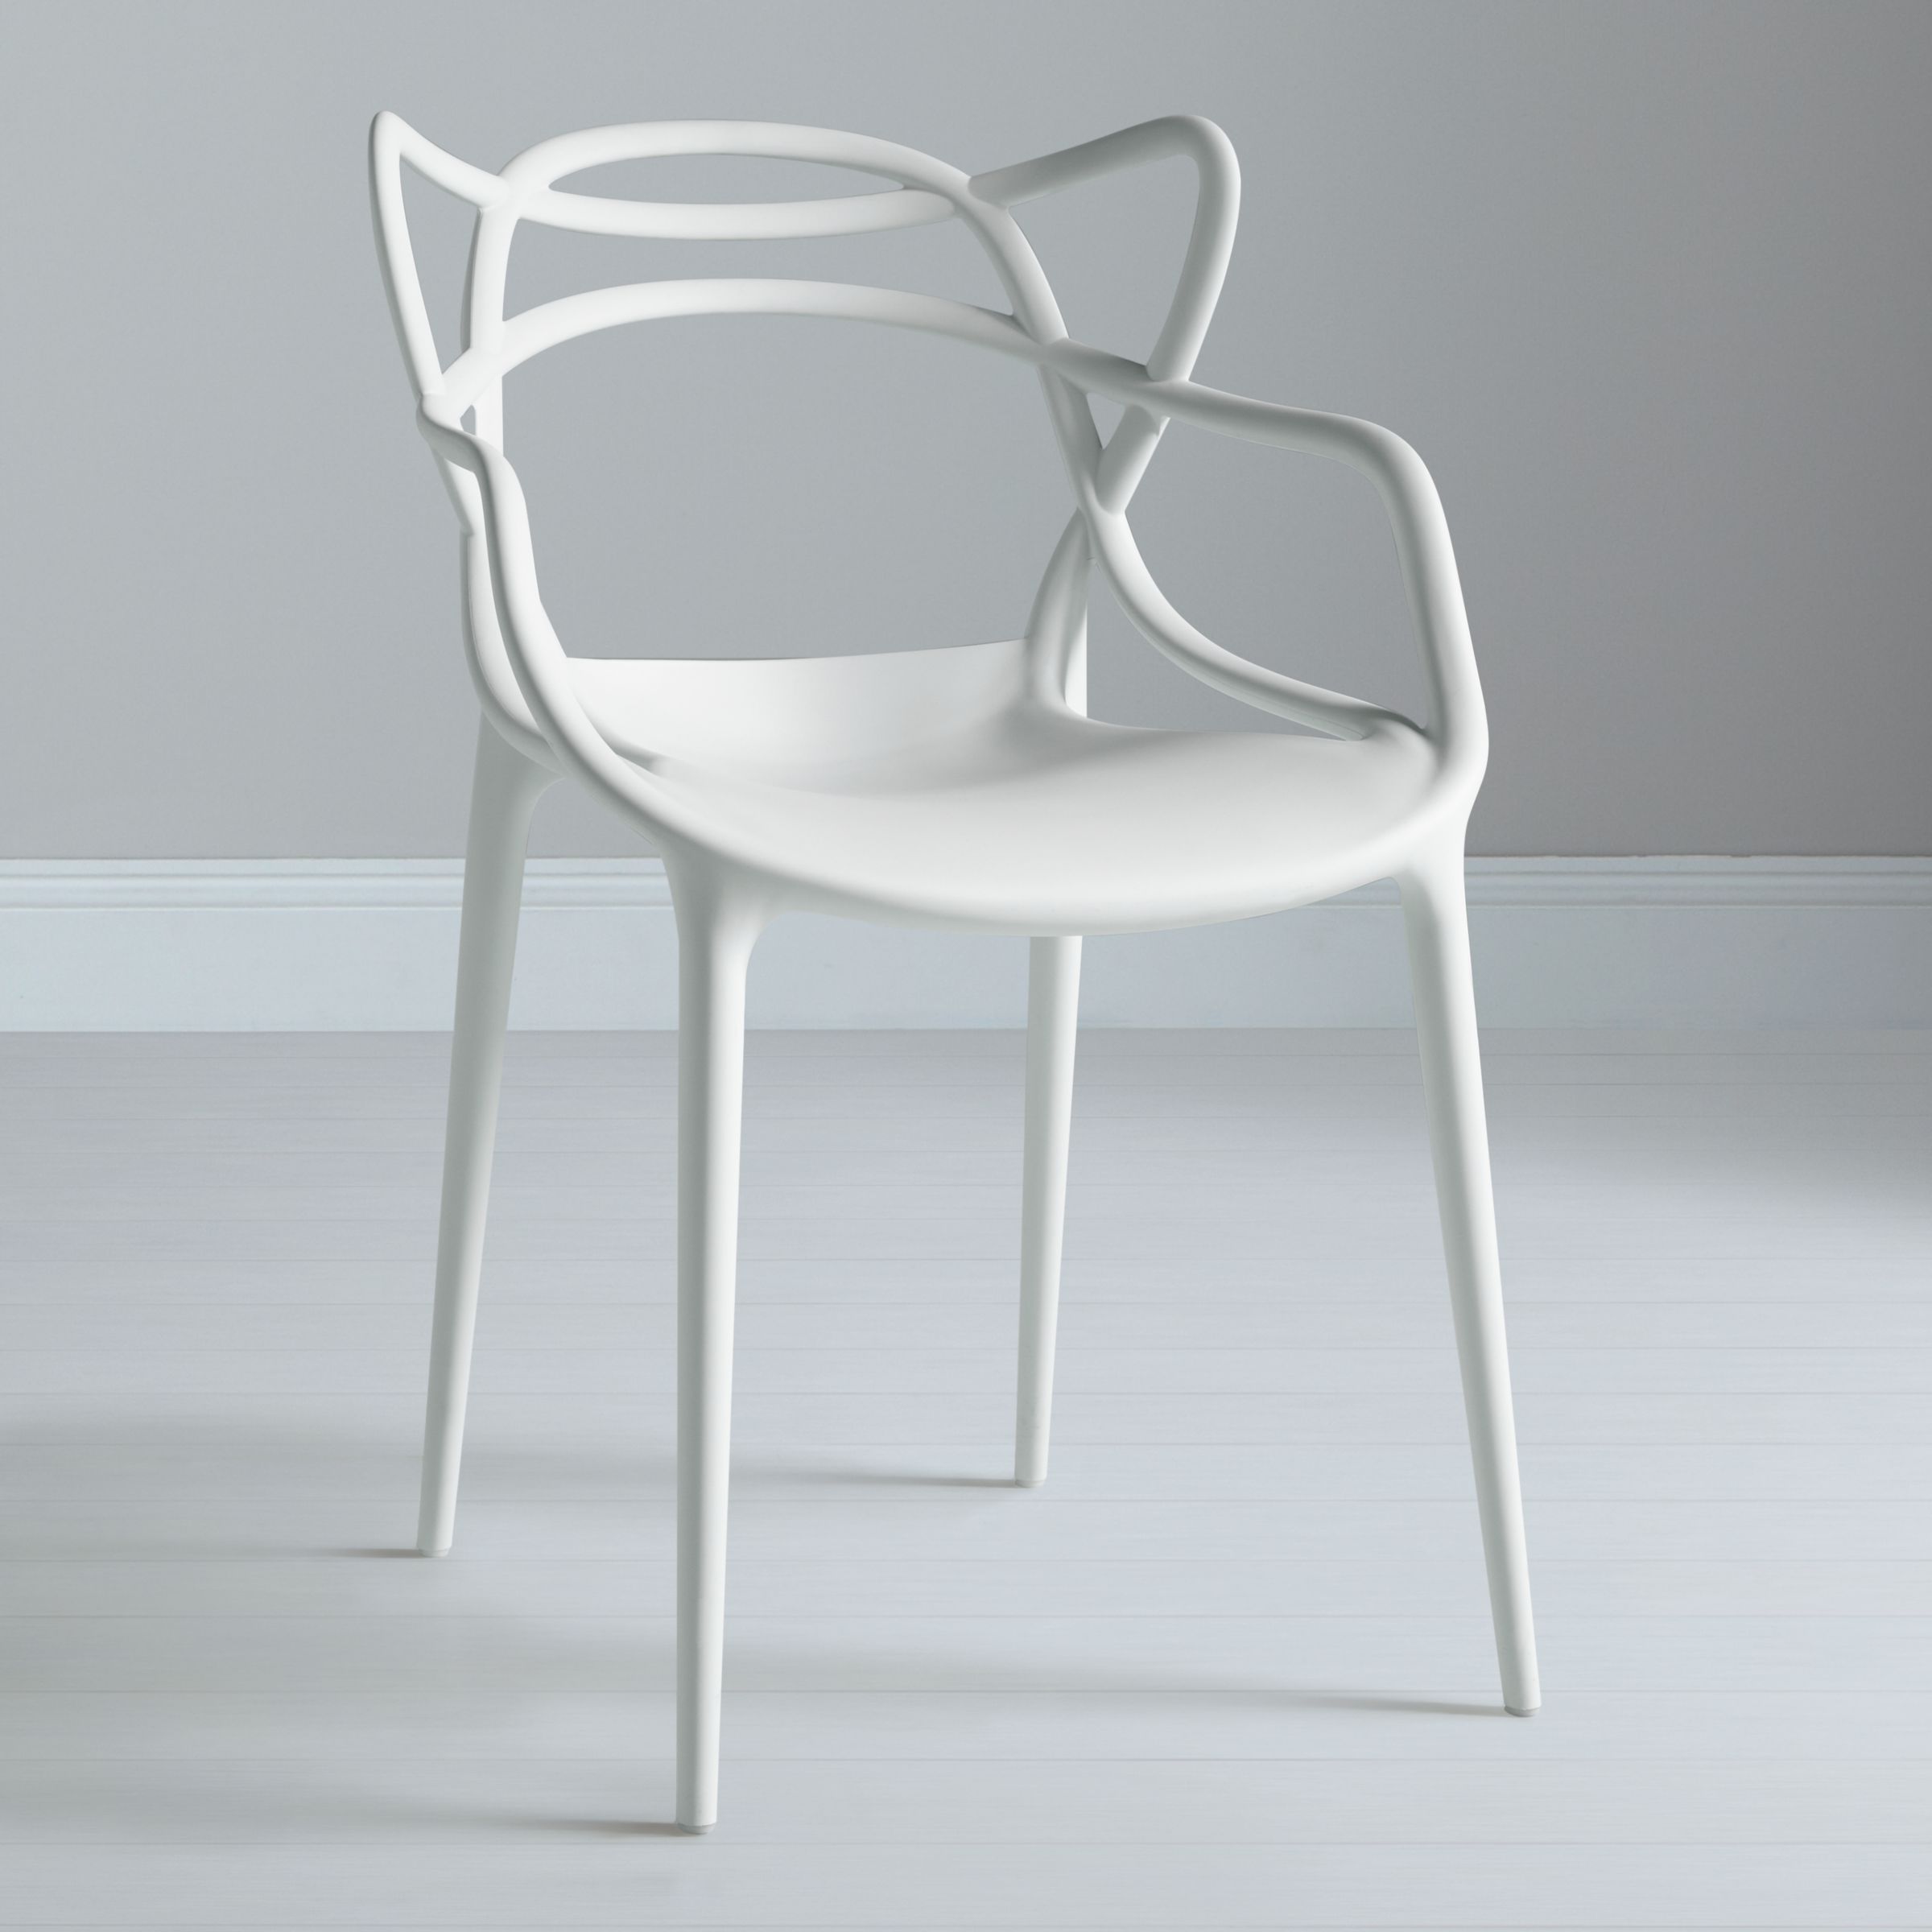 Philippe Starck for Kartell Masters Chair, White, Pair at John Lewis